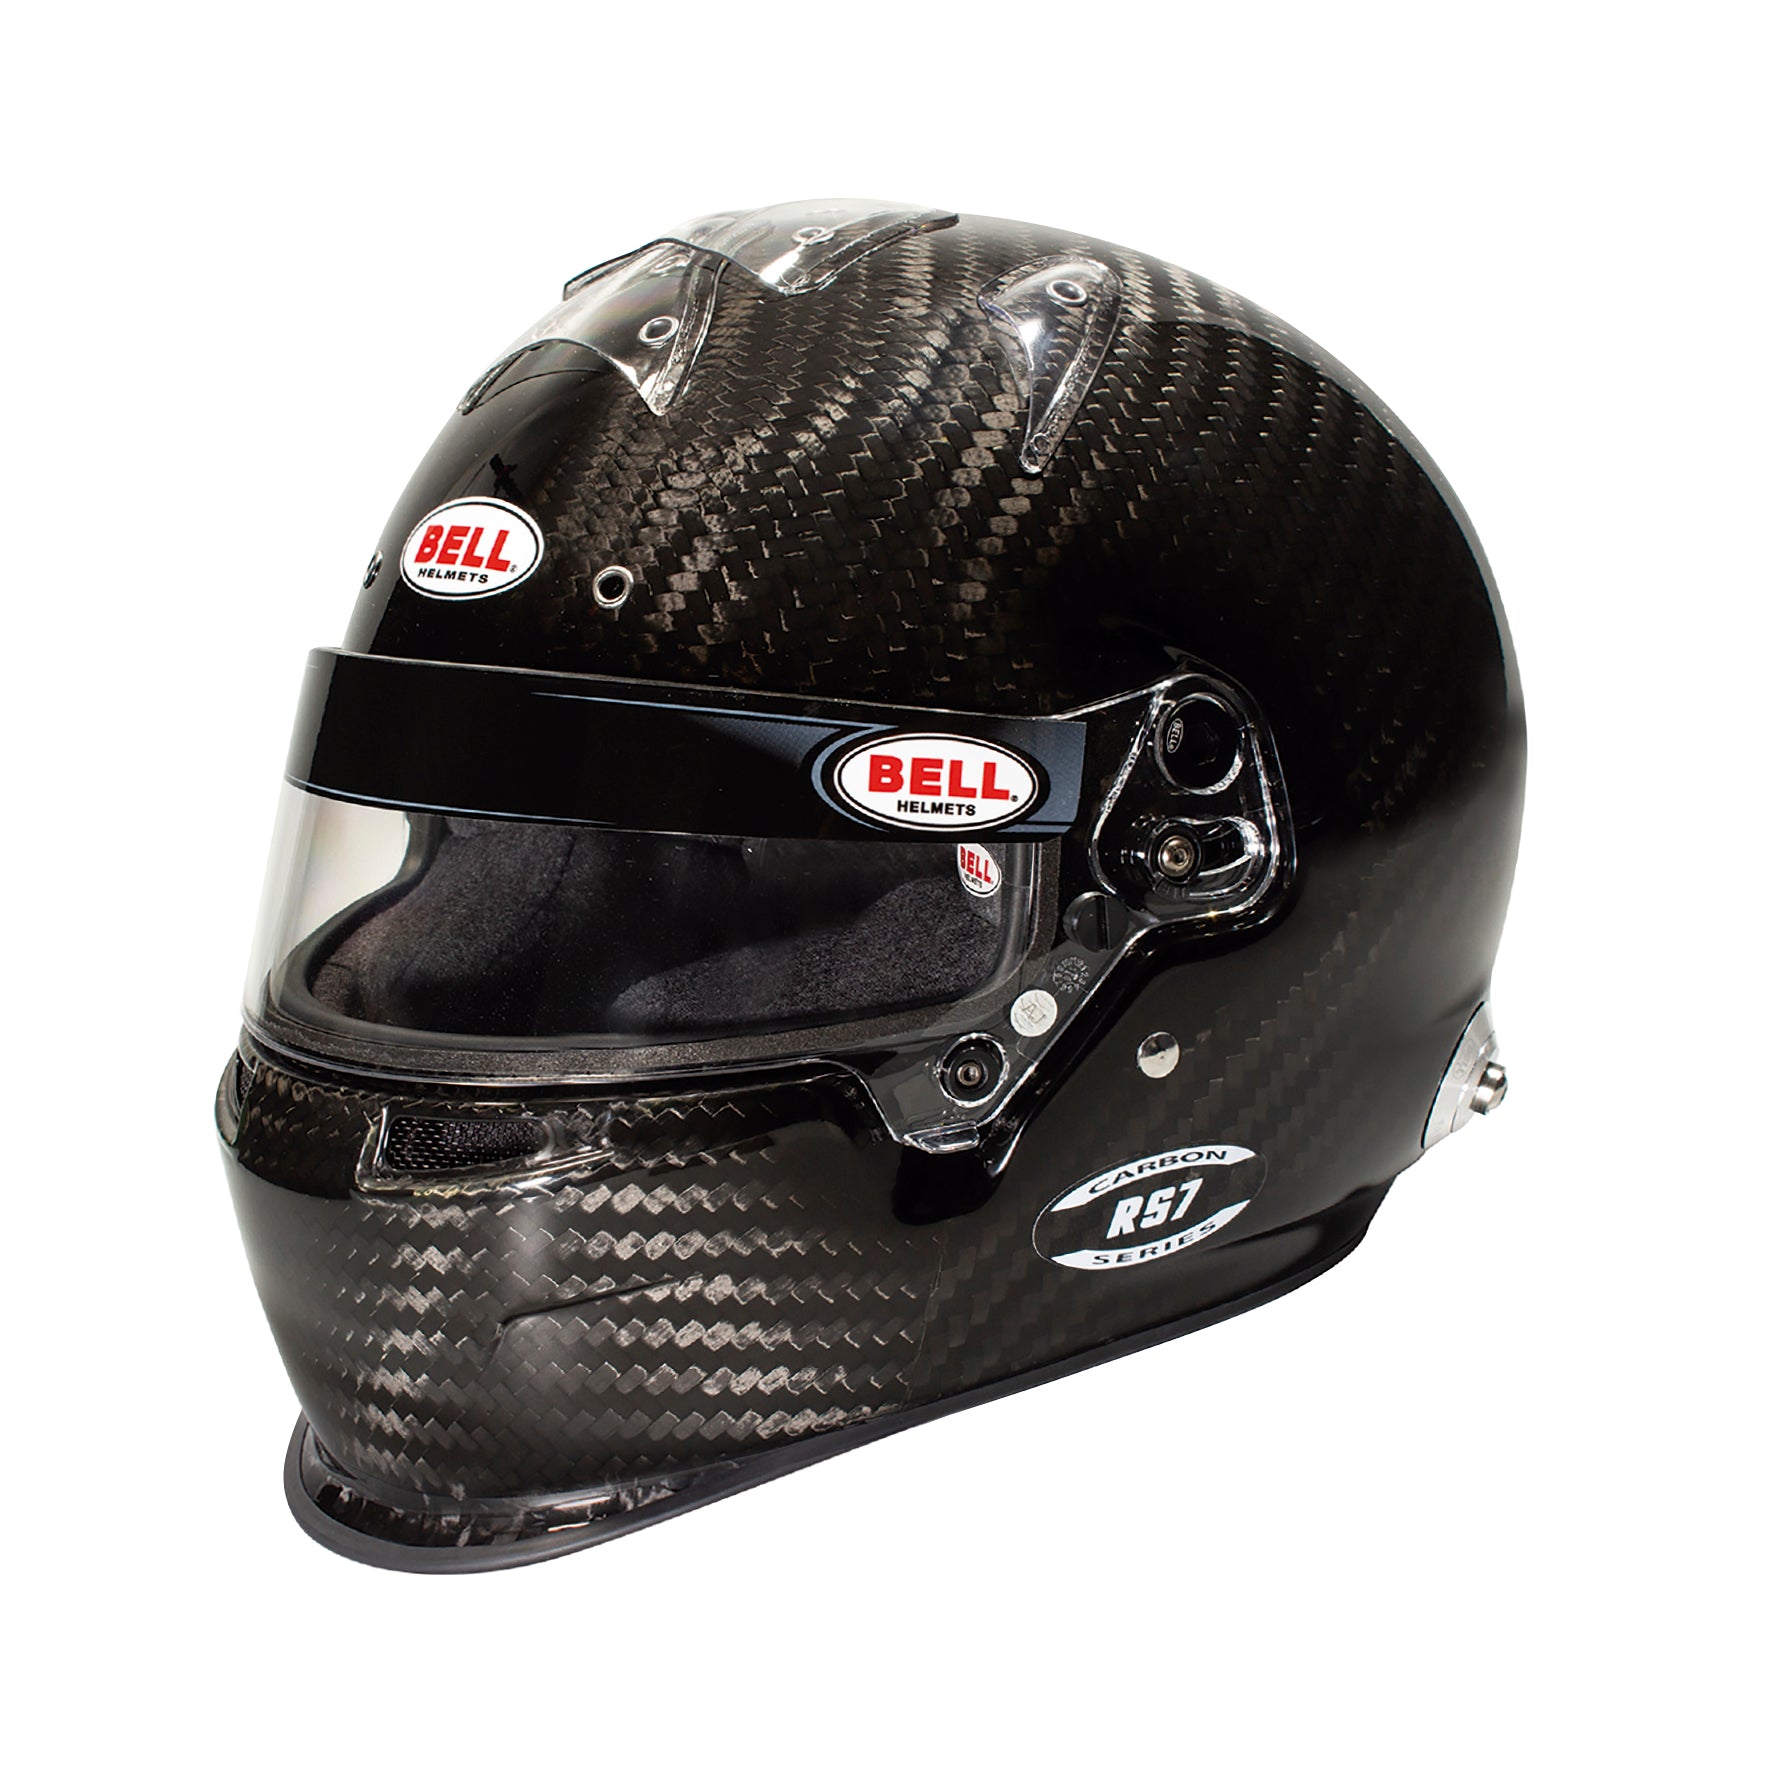 BELL 1204A02 Шолом full face RS7 CARBON DUCKBILL, HANS, FIA, size 55 (6 7/8) Photo-1 